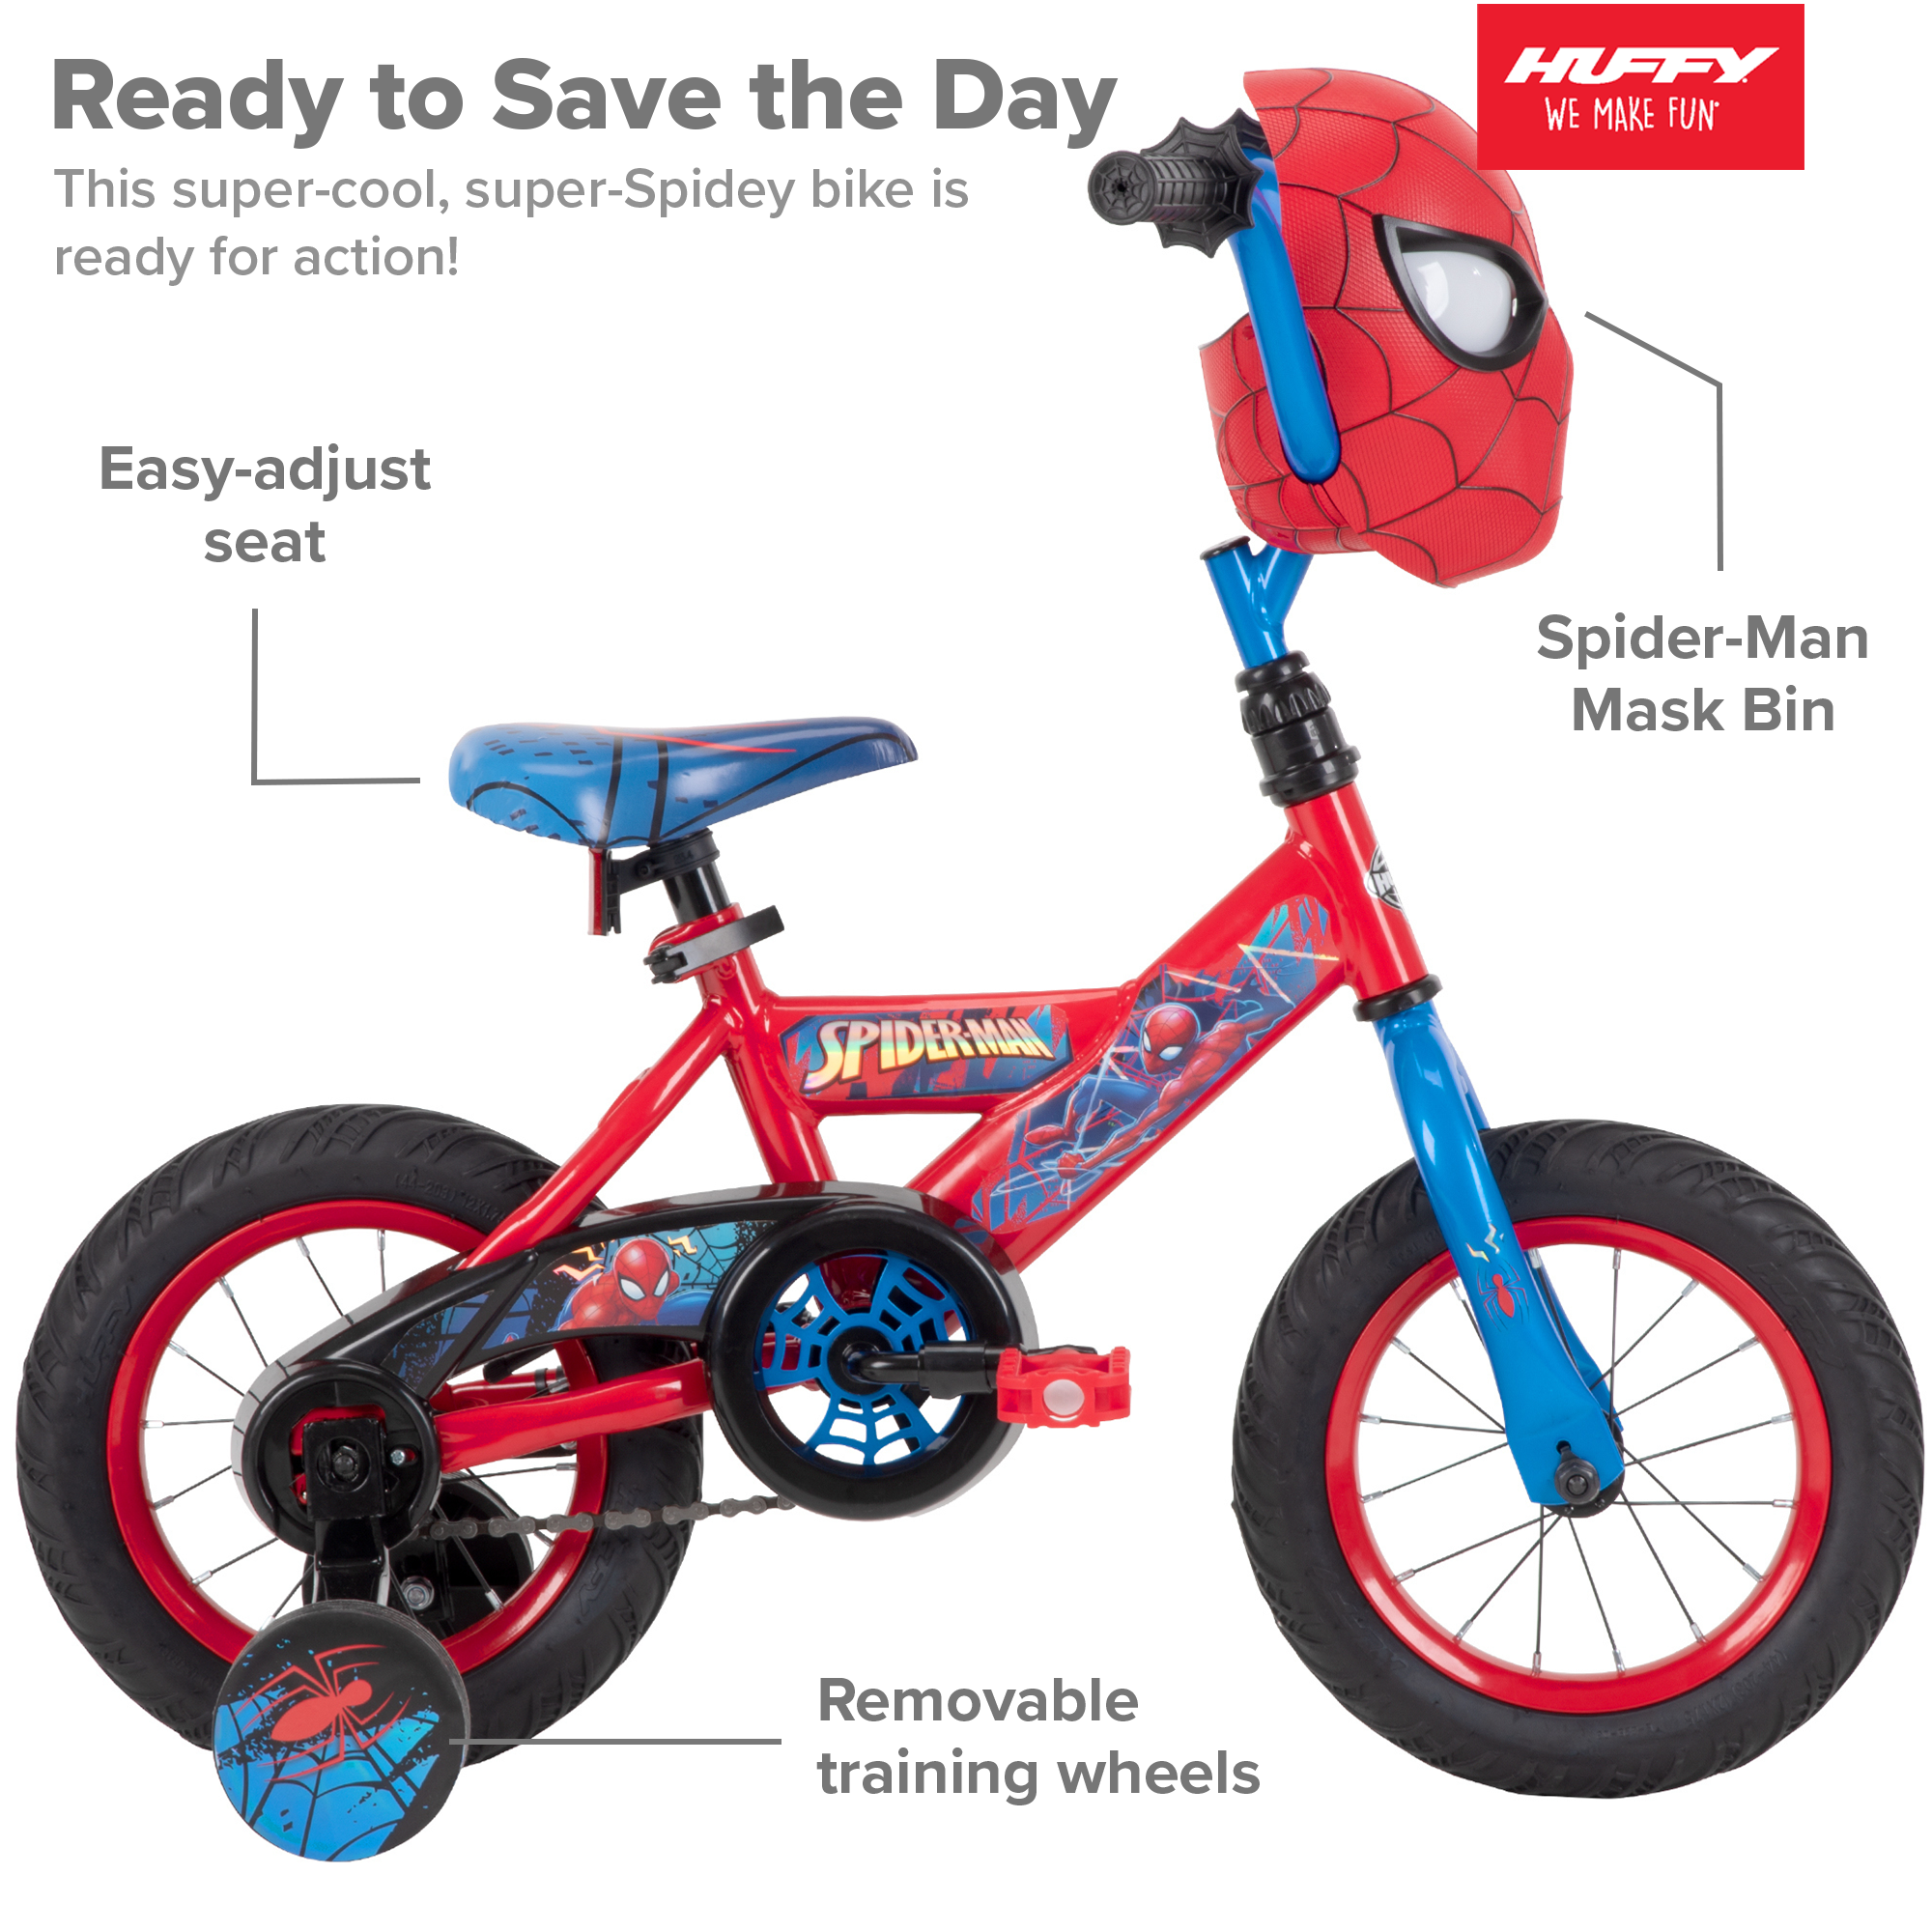 12" Marvel Spider-Man Bike with Training Wheels, for Boys', Red by Huffy - image 4 of 12